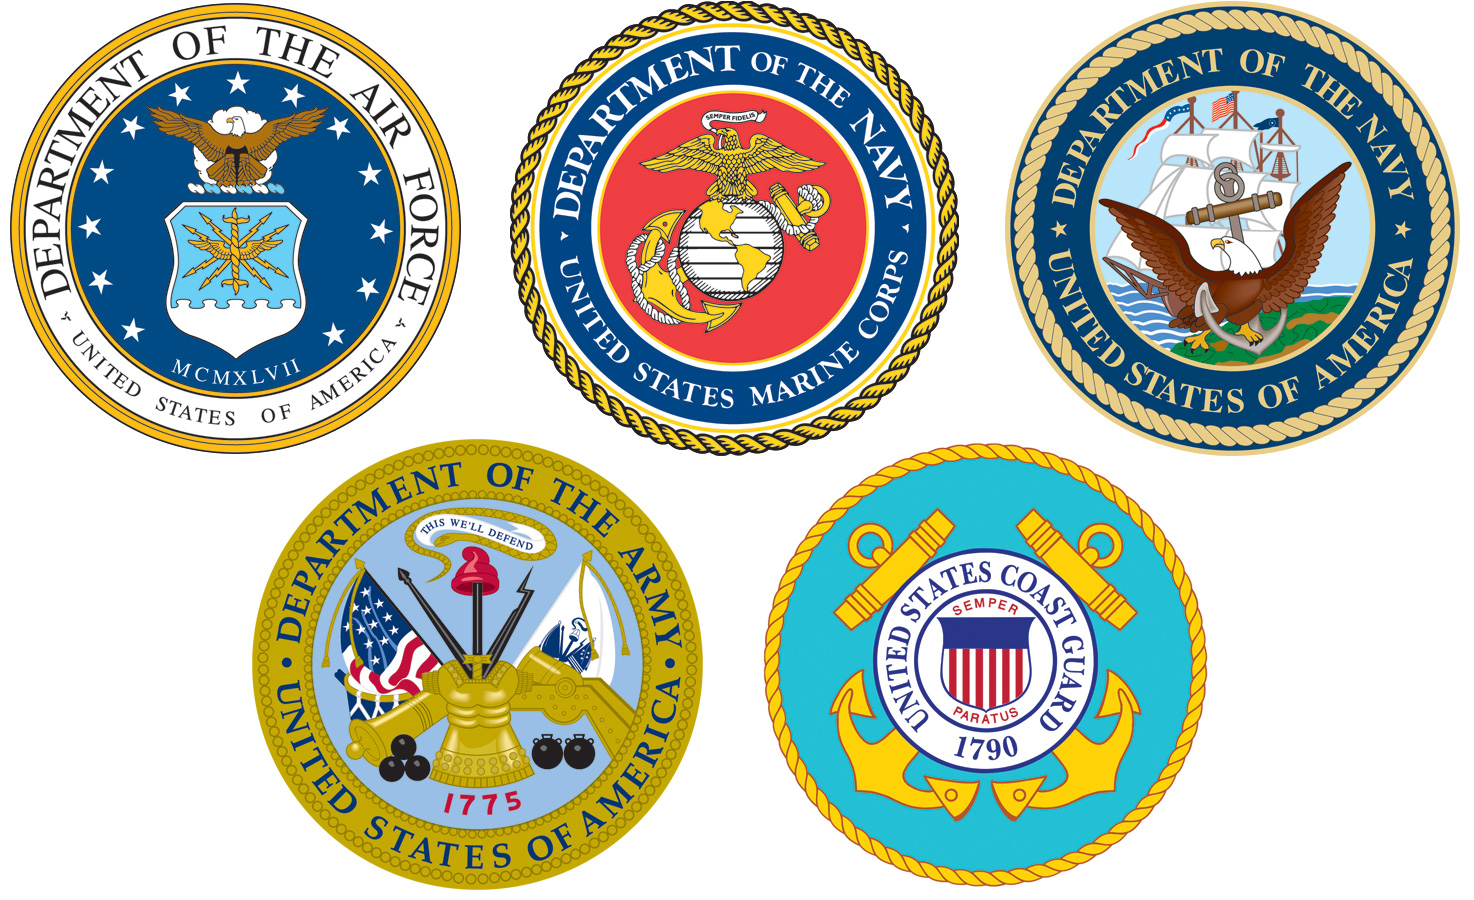 Veteran Resources logos of all 5 branches of the US military